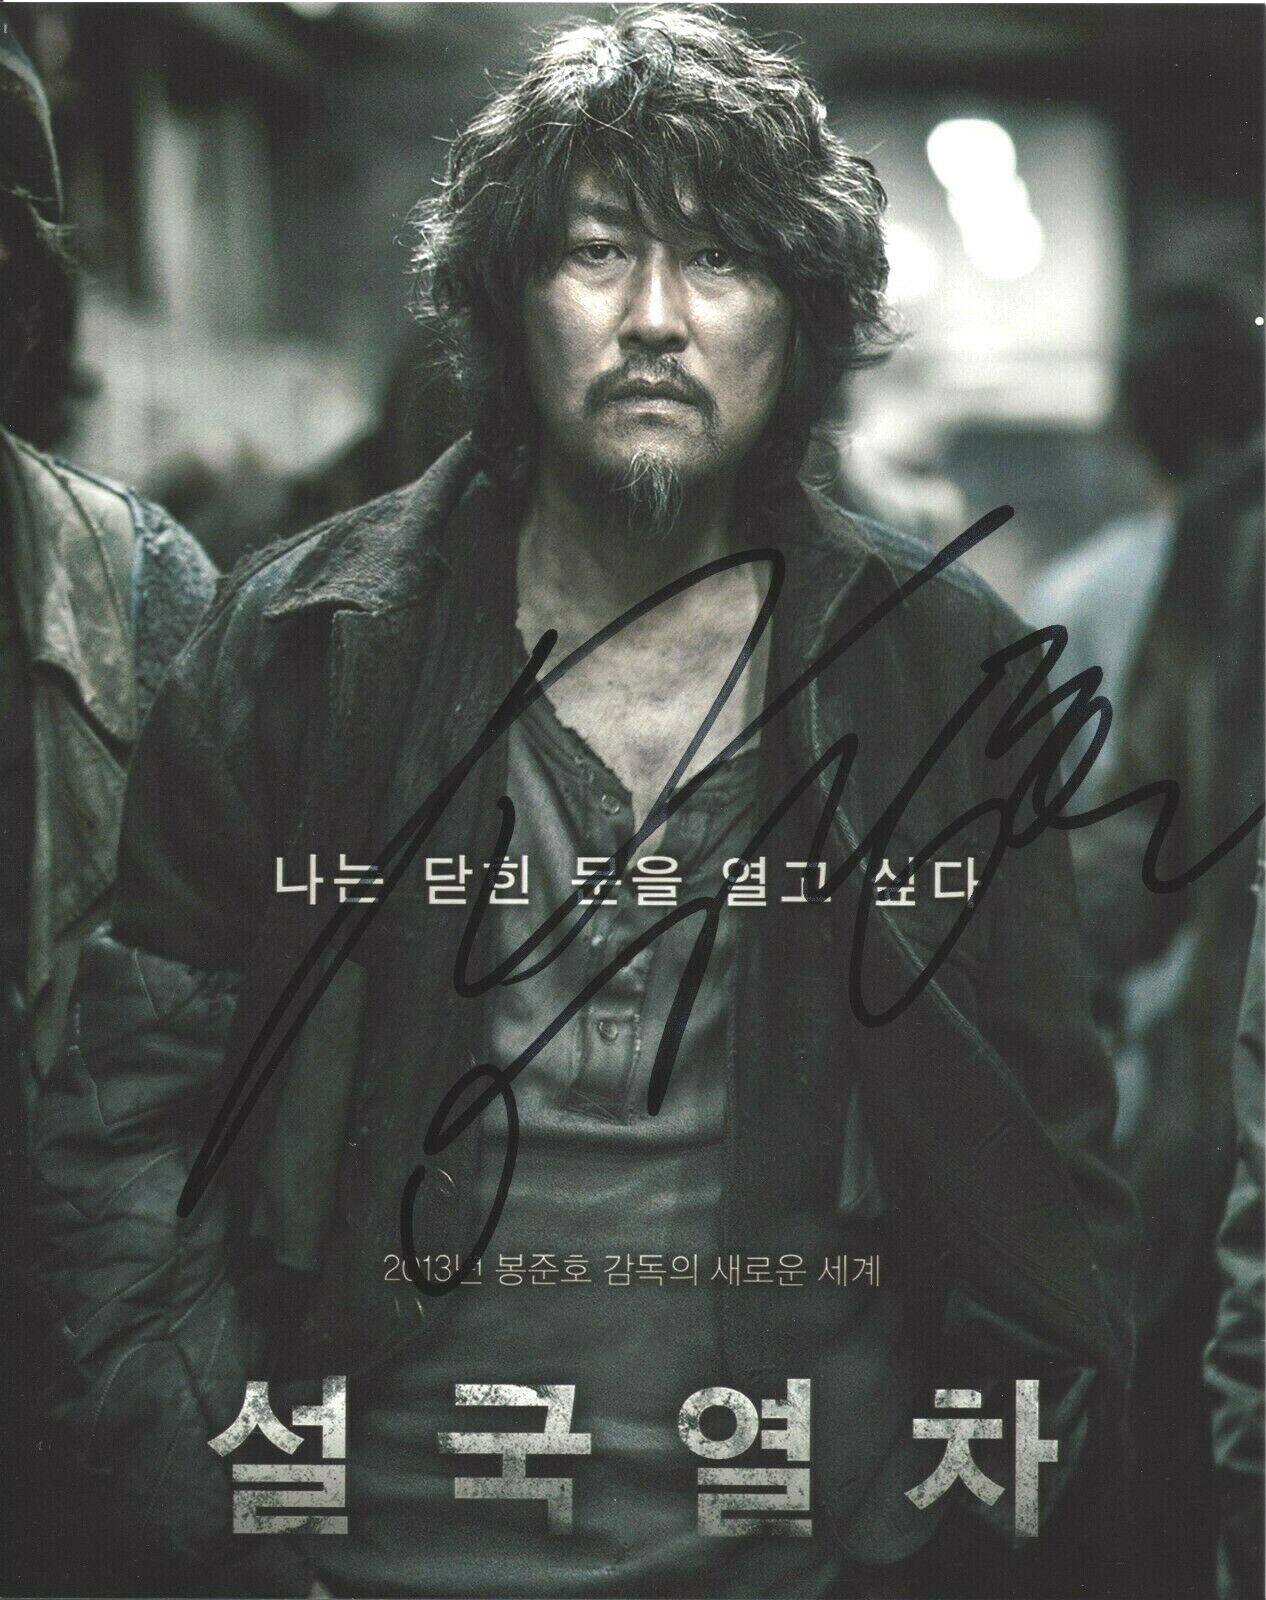 ACTOR SONG KANG-HO SIGNED SNOWPIERCER 8x10 Photo Poster painting w/COA PARASITE MOVIE THE HOST